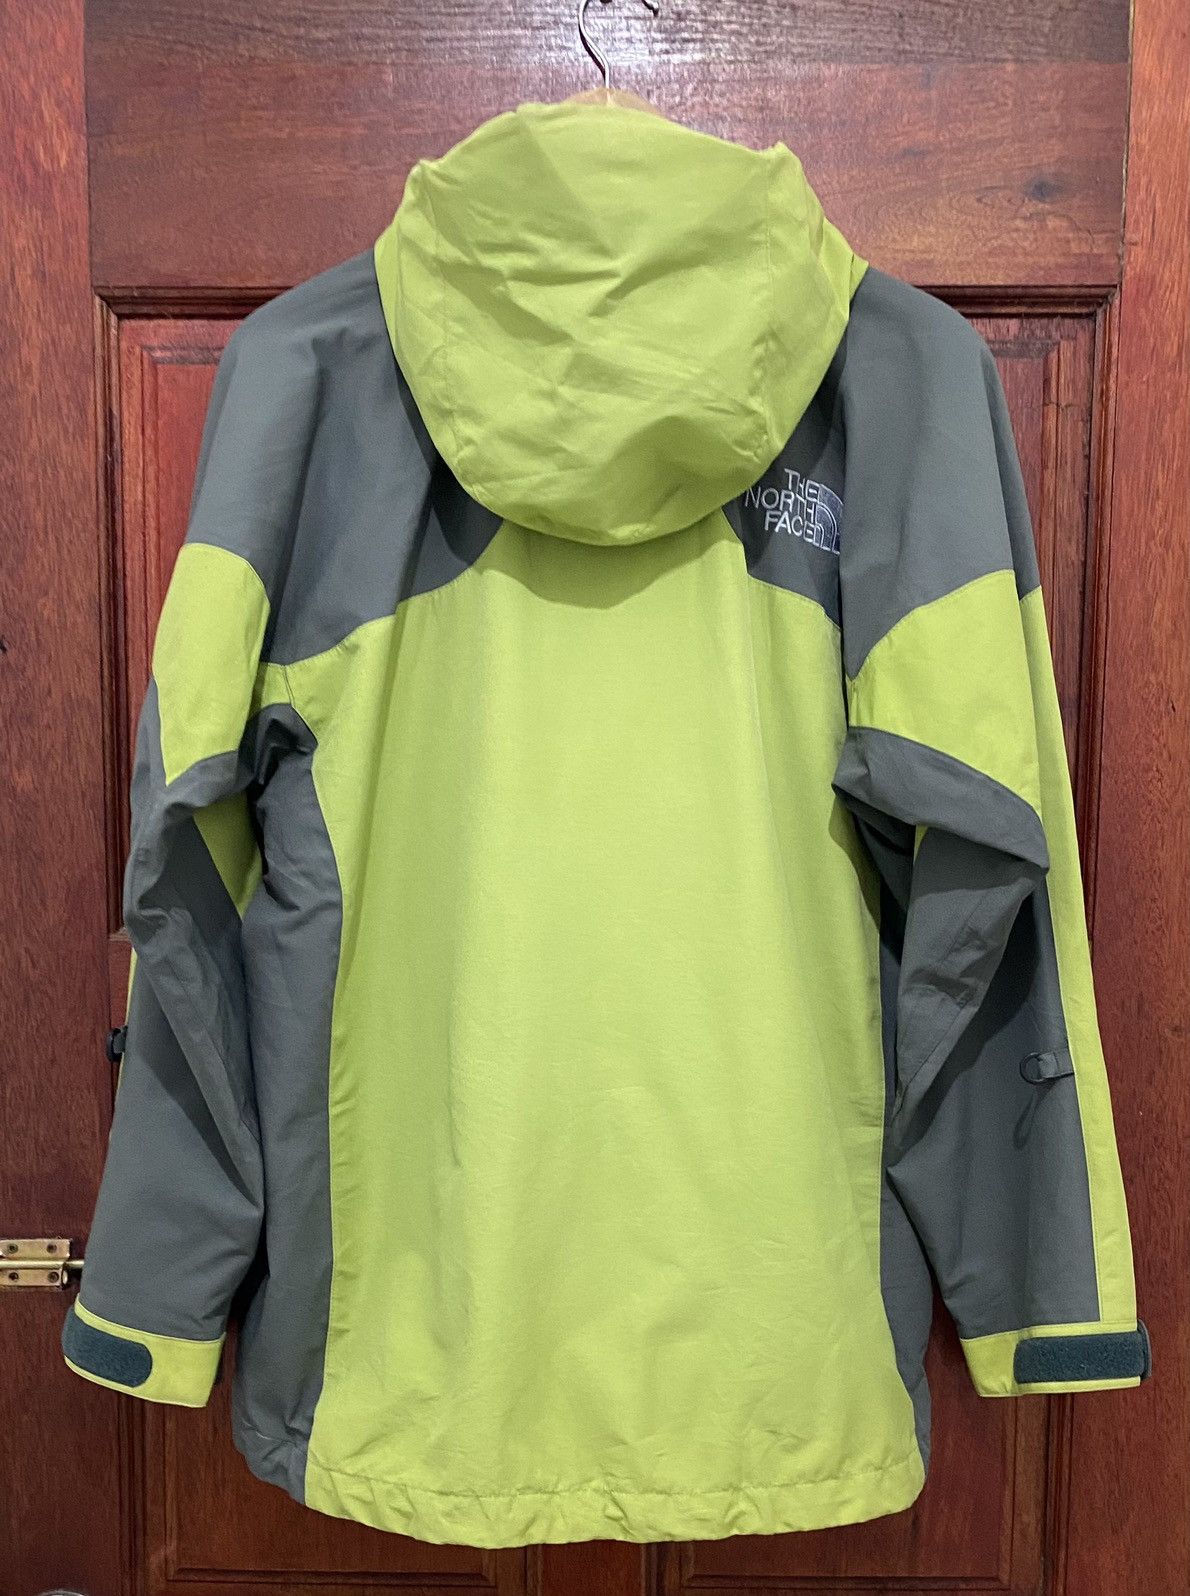 The North Face Gore-Tex Gorpcore Jacket - 2